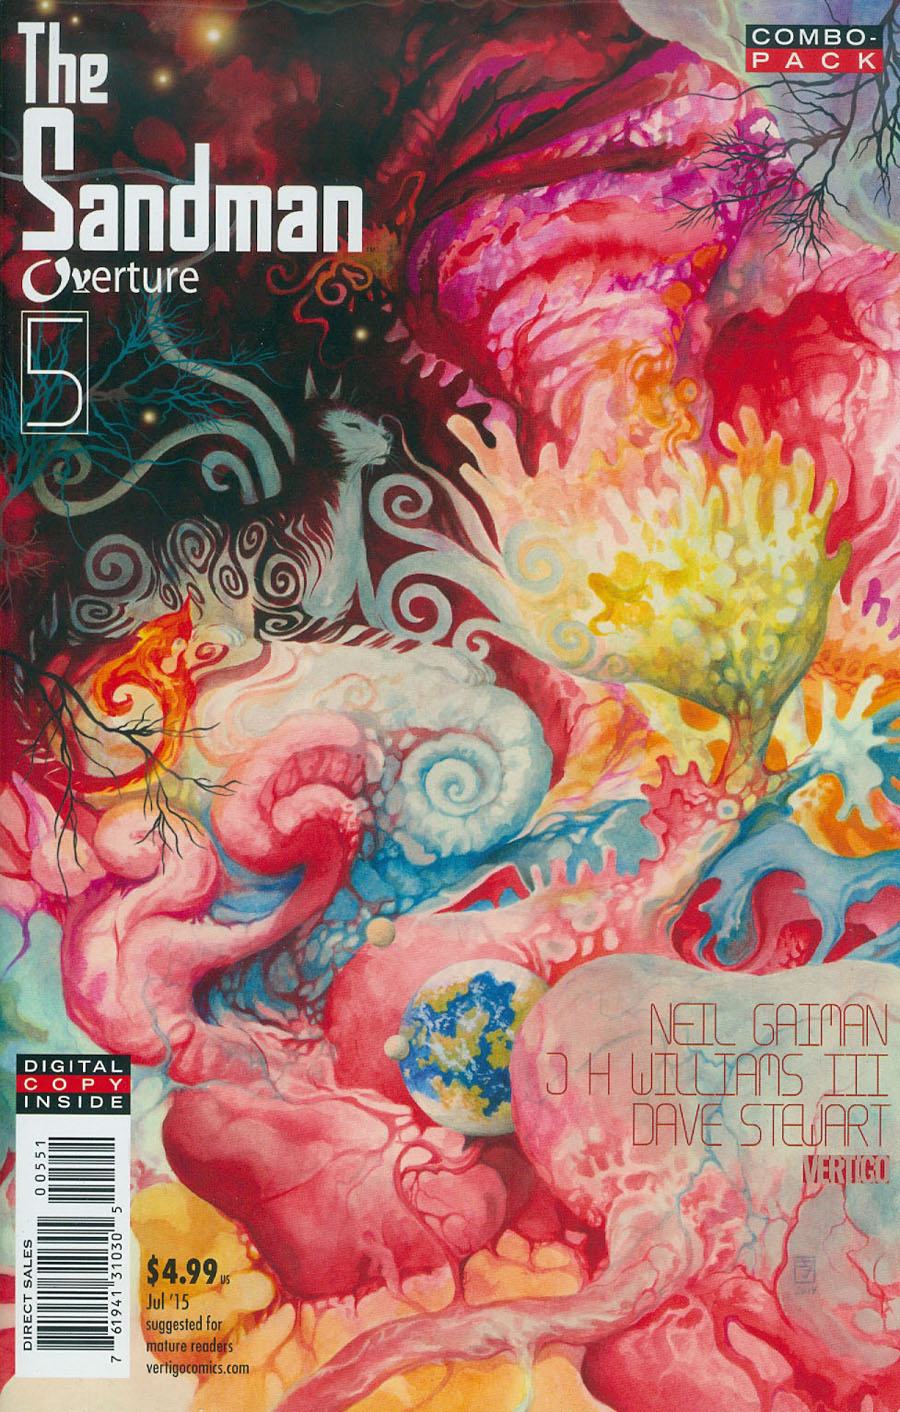 Sandman Overture #5 Cover D Combo Pack Without Polybag